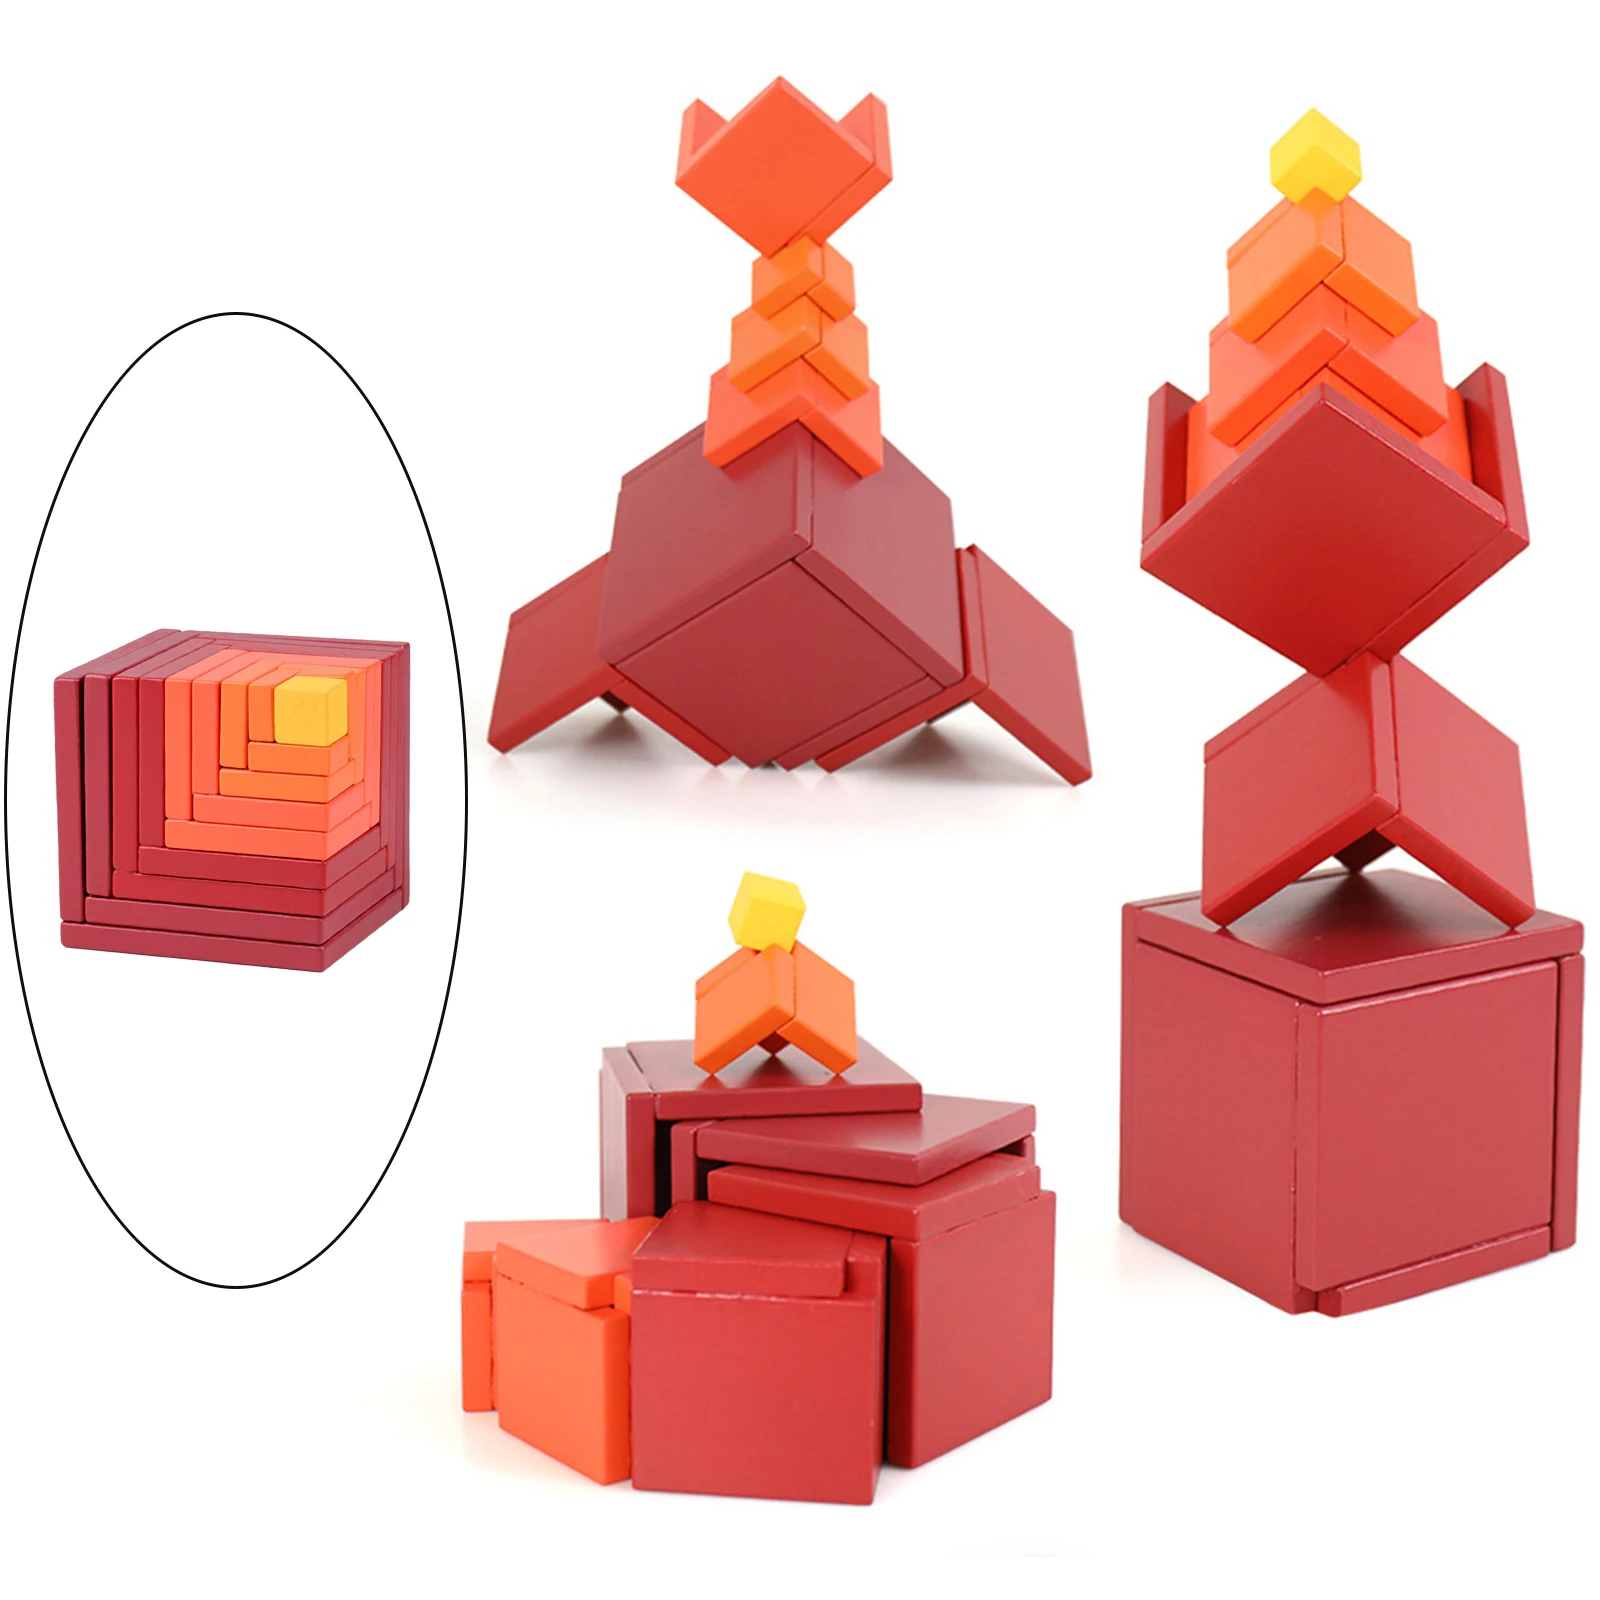 3D Puzzle Cubes Building Blocks Educational Bricks Stress Relief Travel Games Toy for Kids Adult